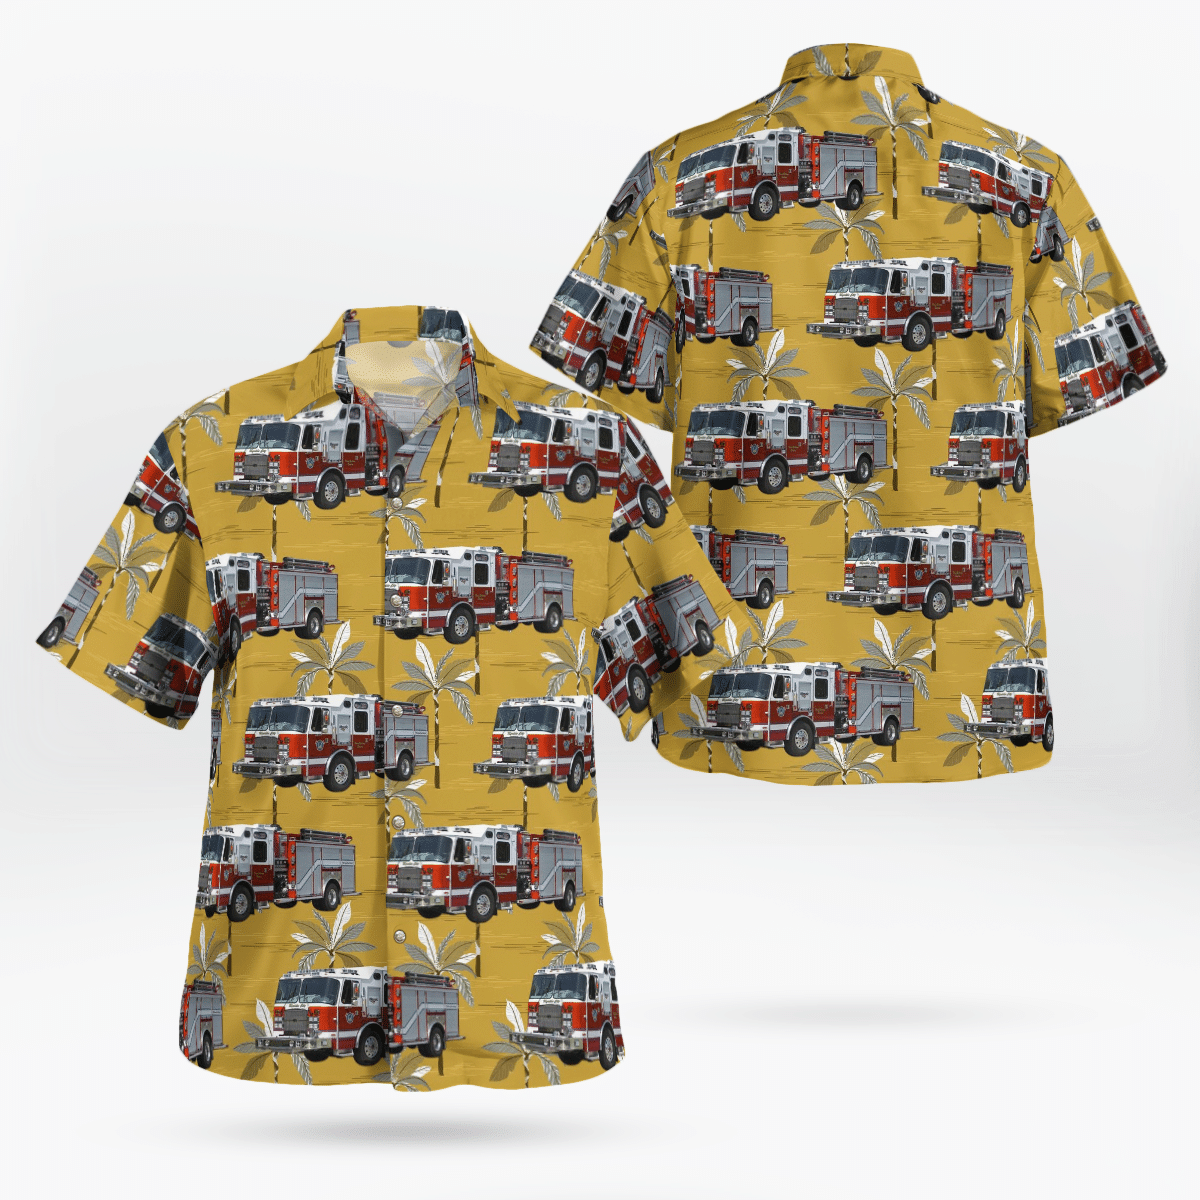 If you are in need of a new summertime look, pick up this Hawaiian shirt 185